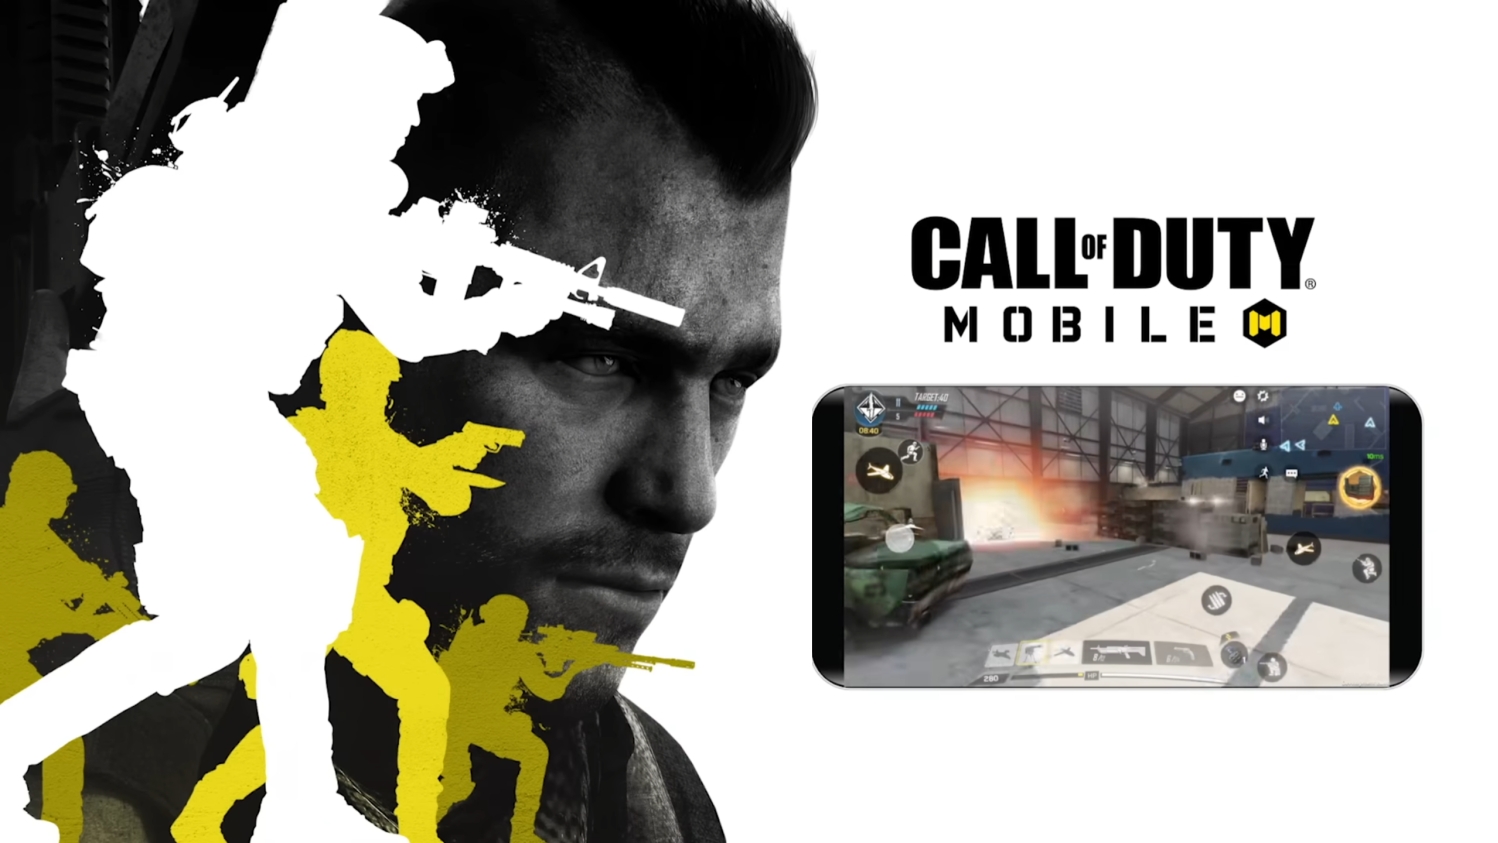 ✓ Call of Duty: Mobile